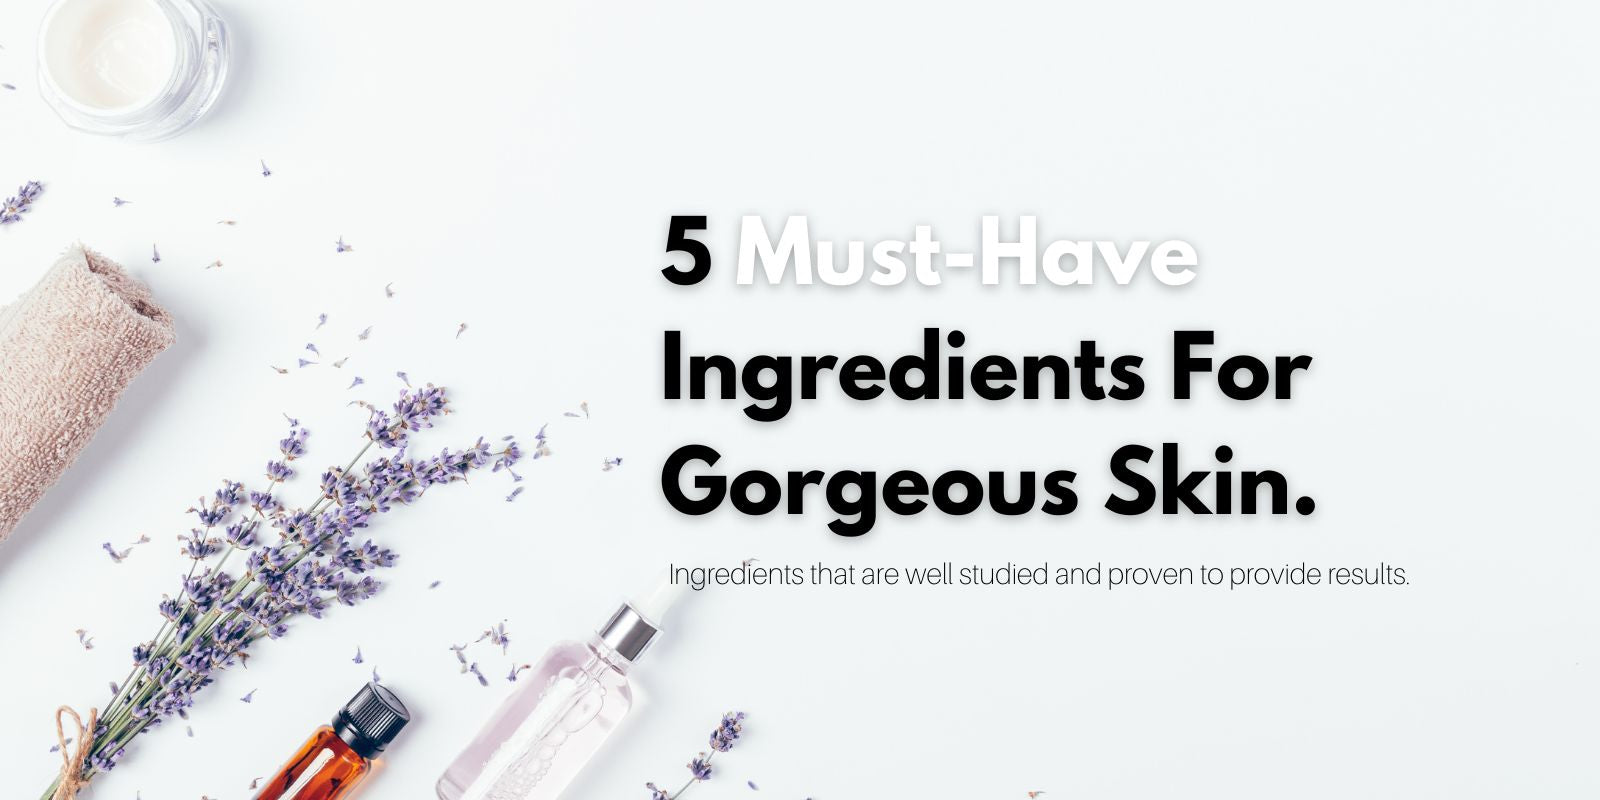 5 must have ingredients for your skincare. azelaic acid, tranexamic acid, niacinamide, syn-ake, copper peptide